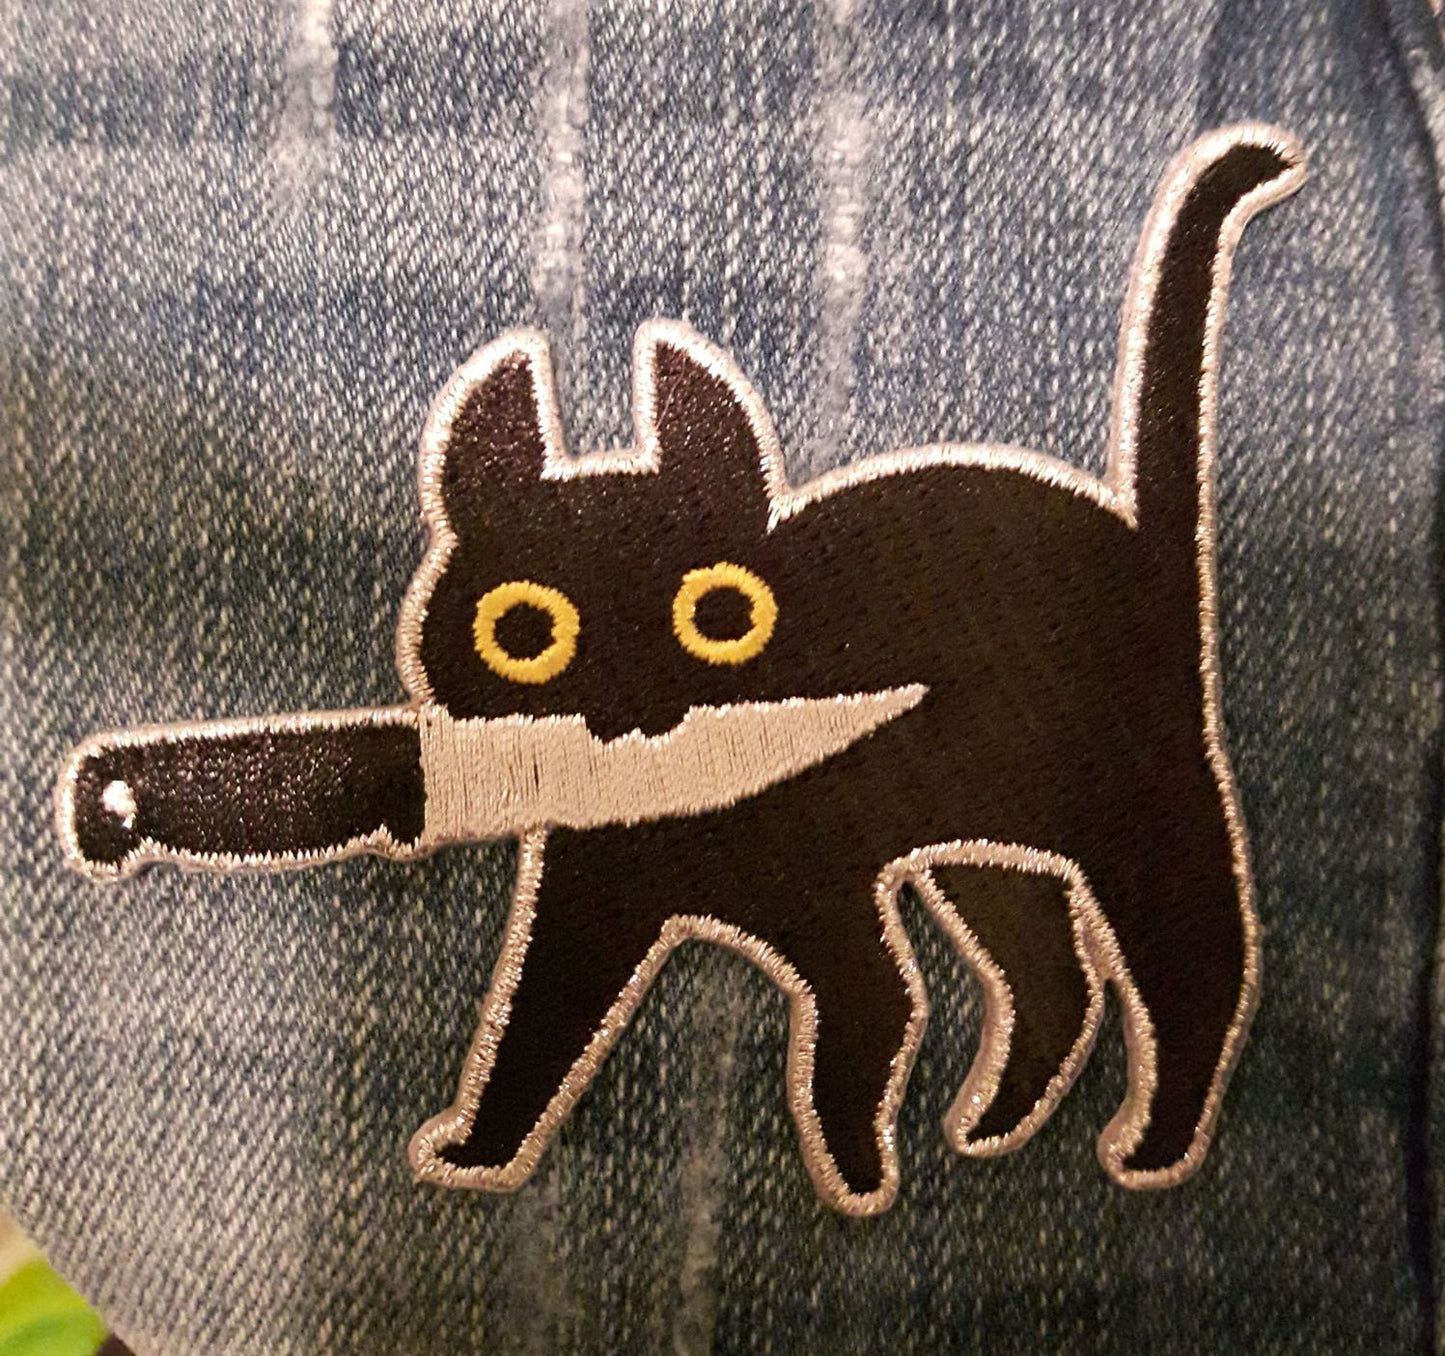 Knifecat embroidered patch